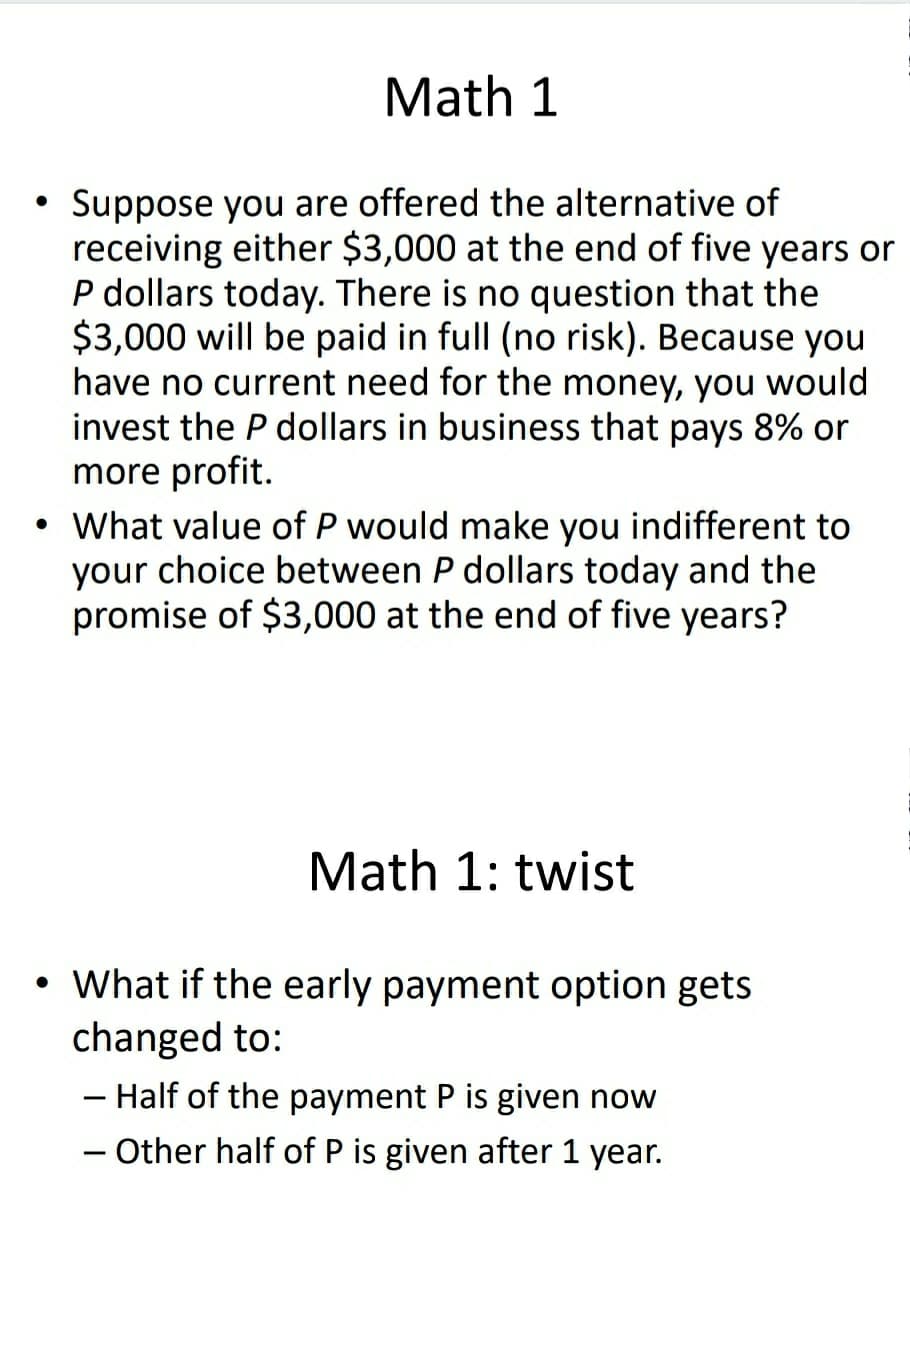 Math 1
Suppose you are offered the alternative of
receiving either $3,000 at the end of five years or
P dollars today. There is no question that the
$3,000 will be paid in full (no risk). Because you
have no current need for the money, you would
invest the P dollars in business that pays 8% or
more profit.
What value of P would make you indifferent to
your choice between P dollars today and the
promise of $3,000 at the end of five years?
Math 1: twist
What if the early payment option gets
changed to:
- Half of the payment P is given now
- Other half of P is given after 1 year.
